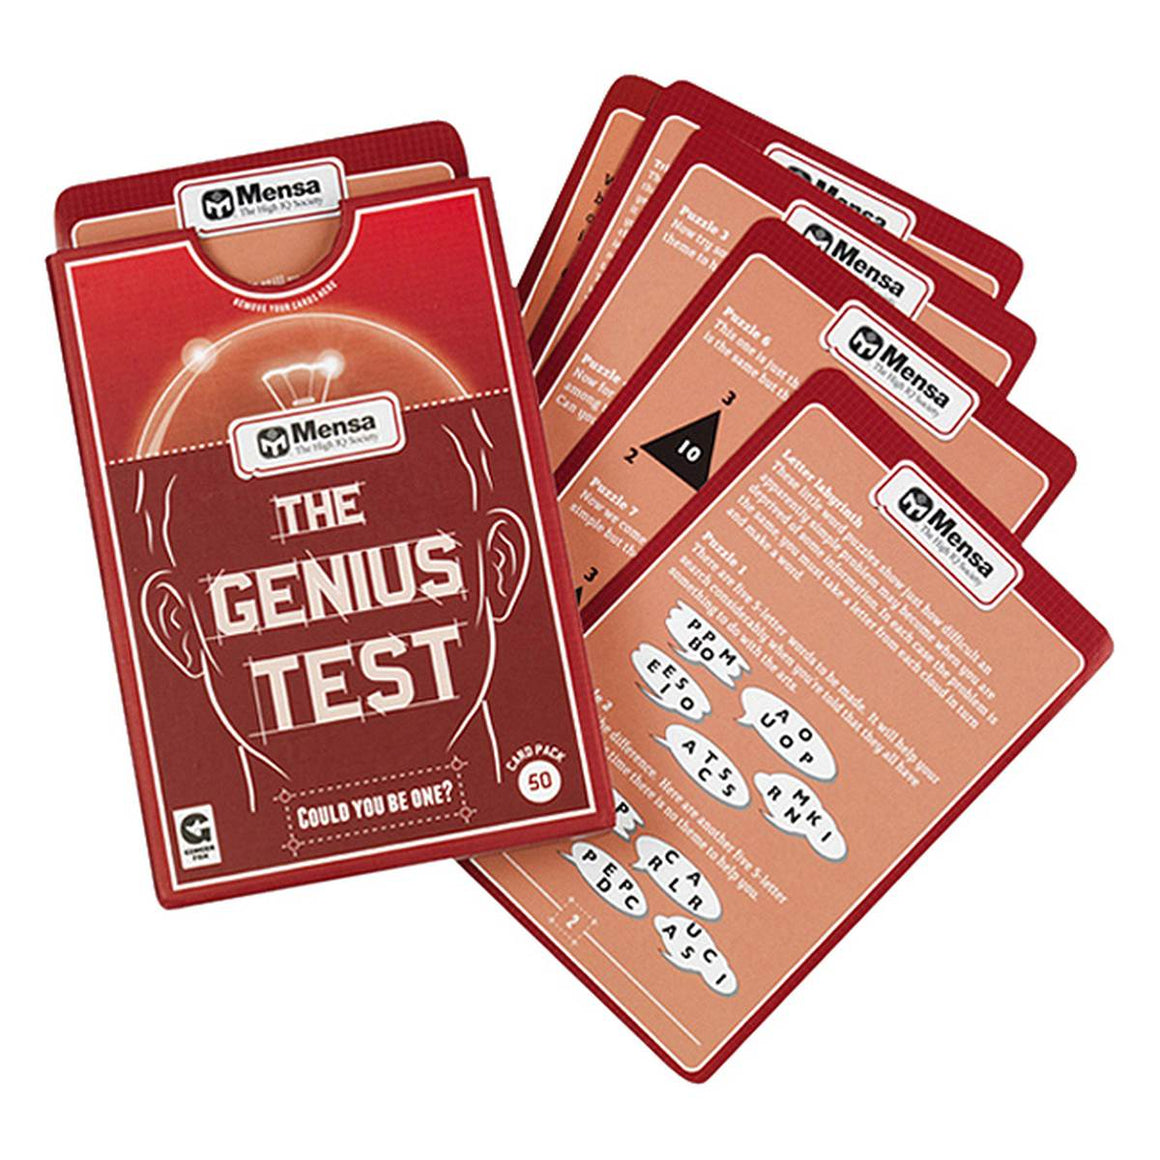 On top of the fanned cards with different questions and puzzles is the red and maroon packaging box with 'the genius test' capitalised in a sketched block font in the centre of the head illustration. 